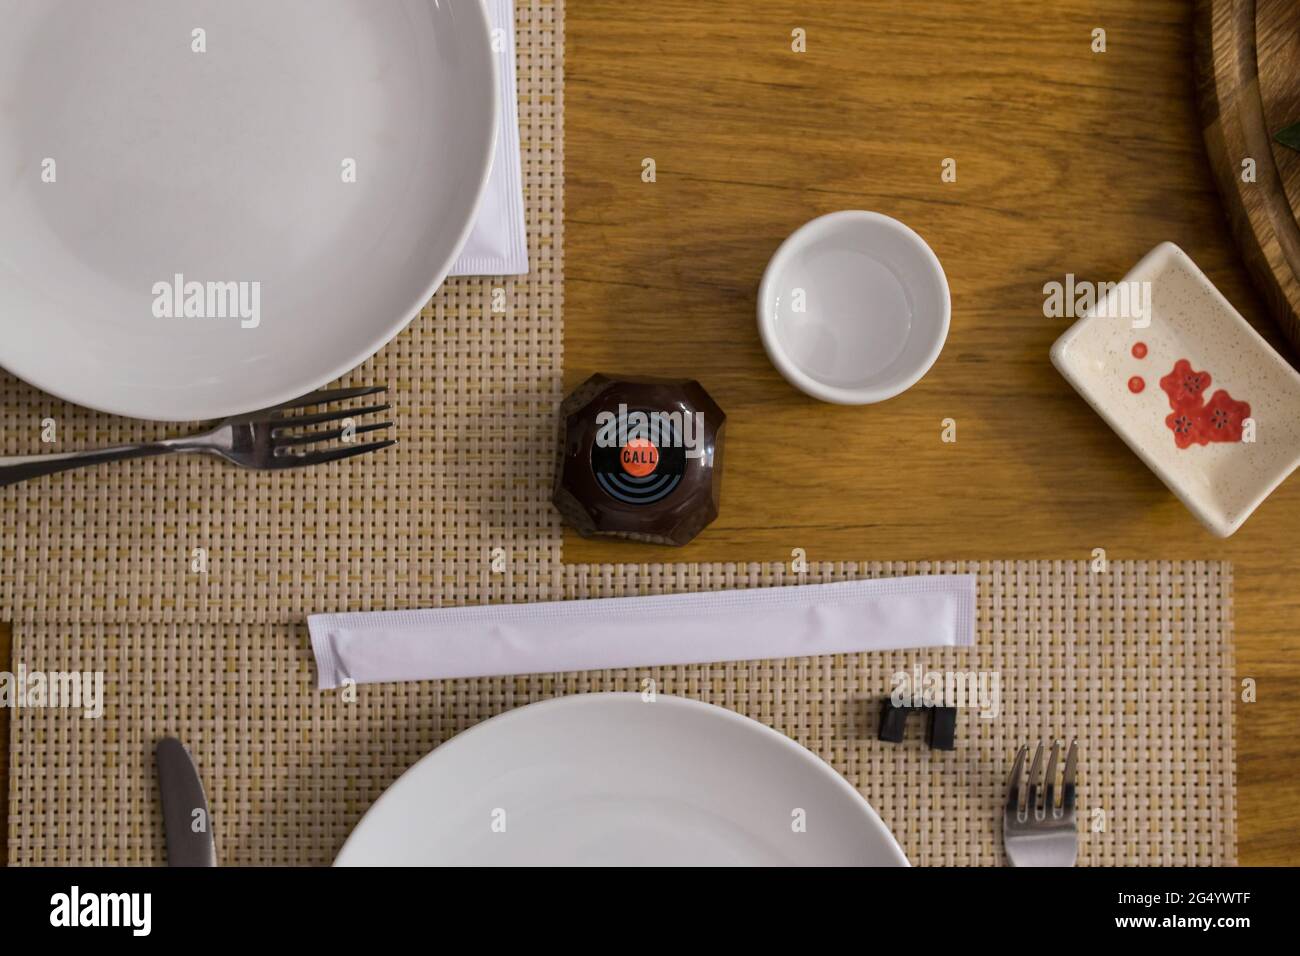 Call button on serve table in restaurant, view from a top. Stock Photo